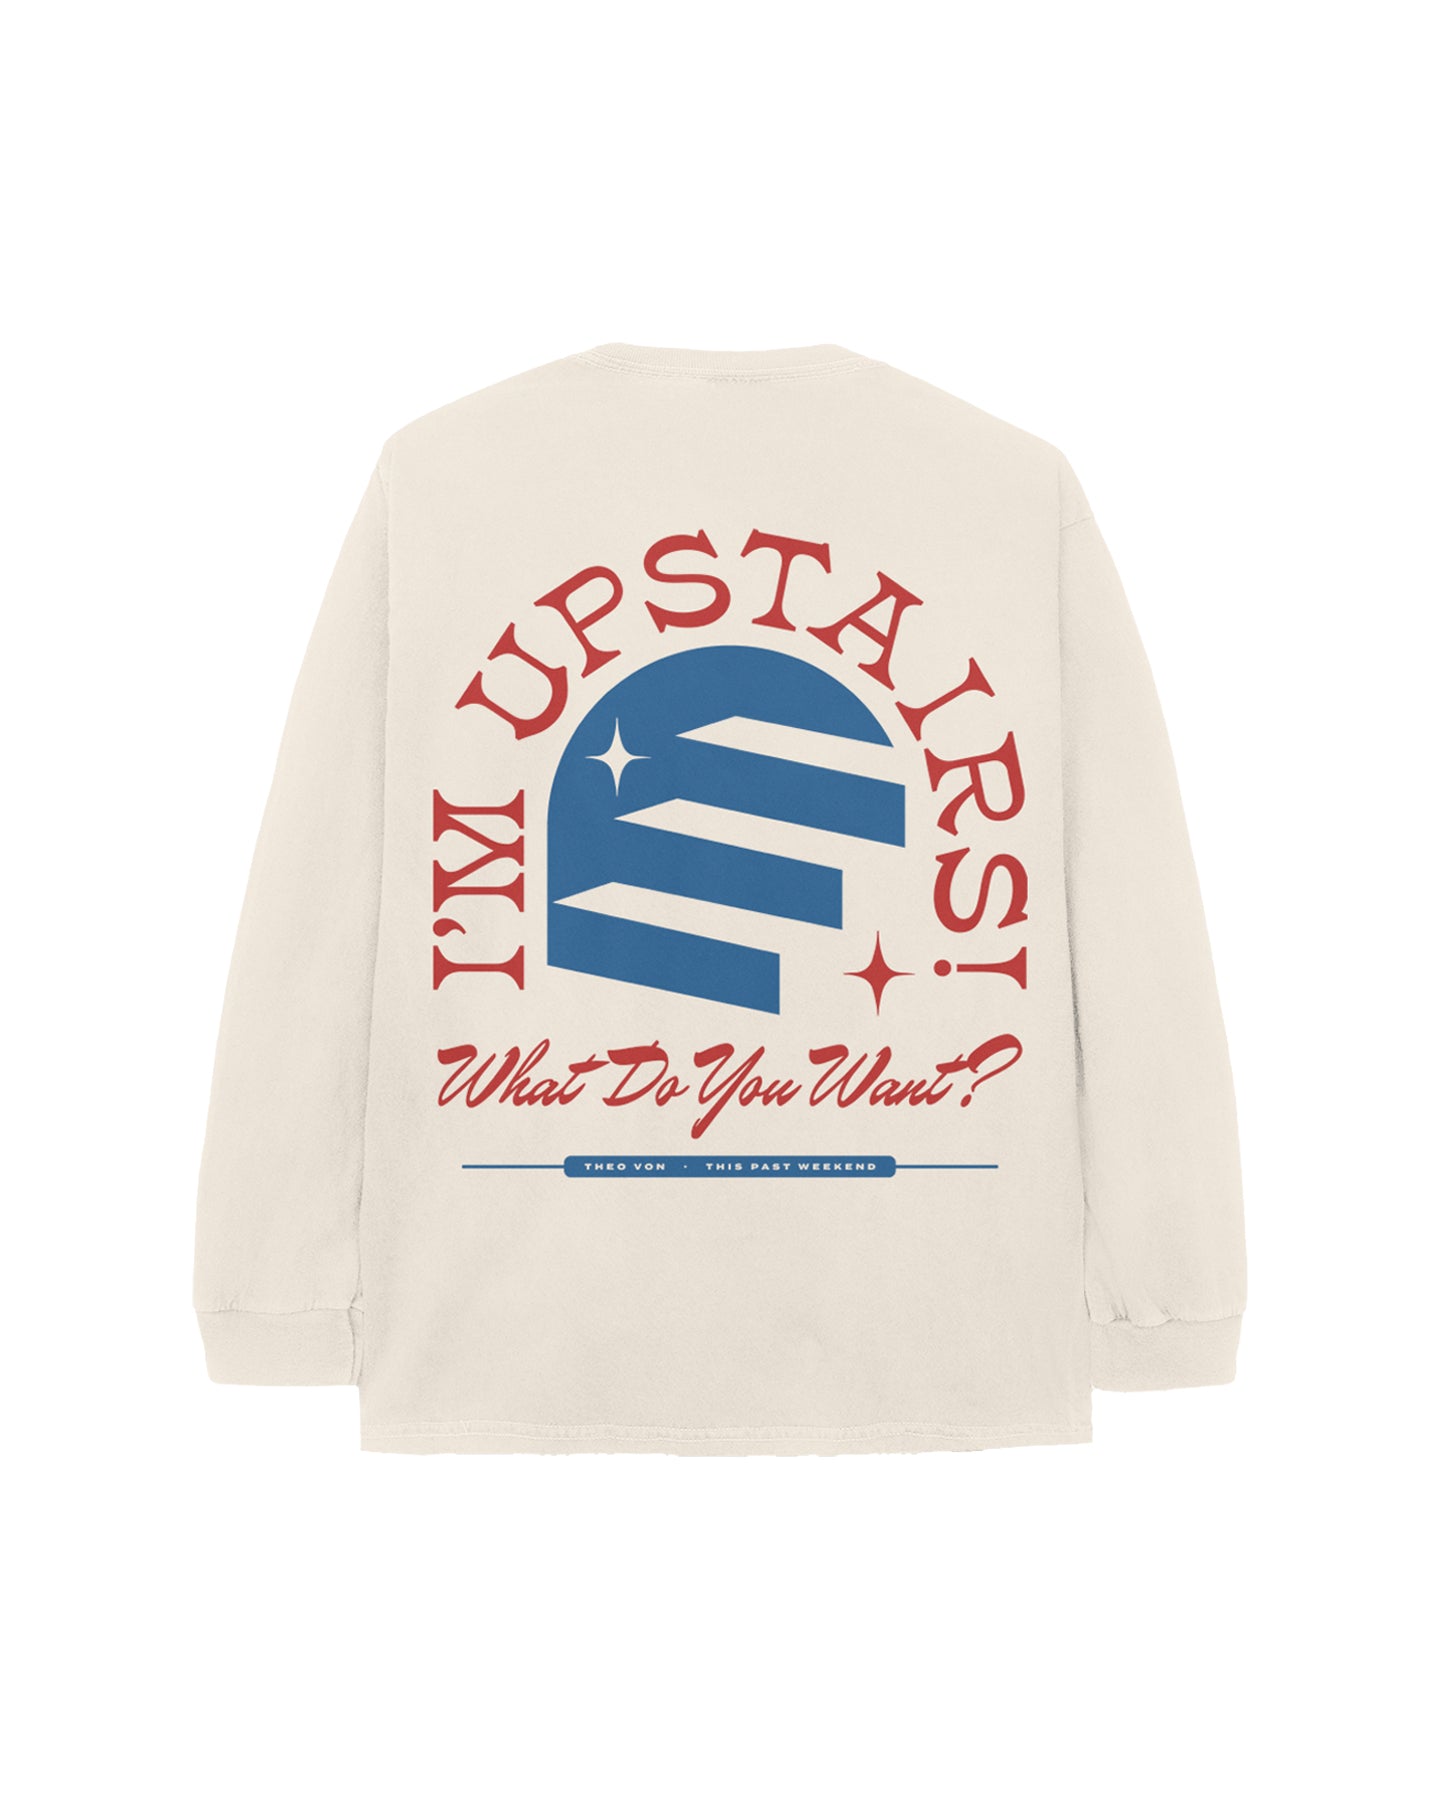 Second Floor Natural Long Sleeve